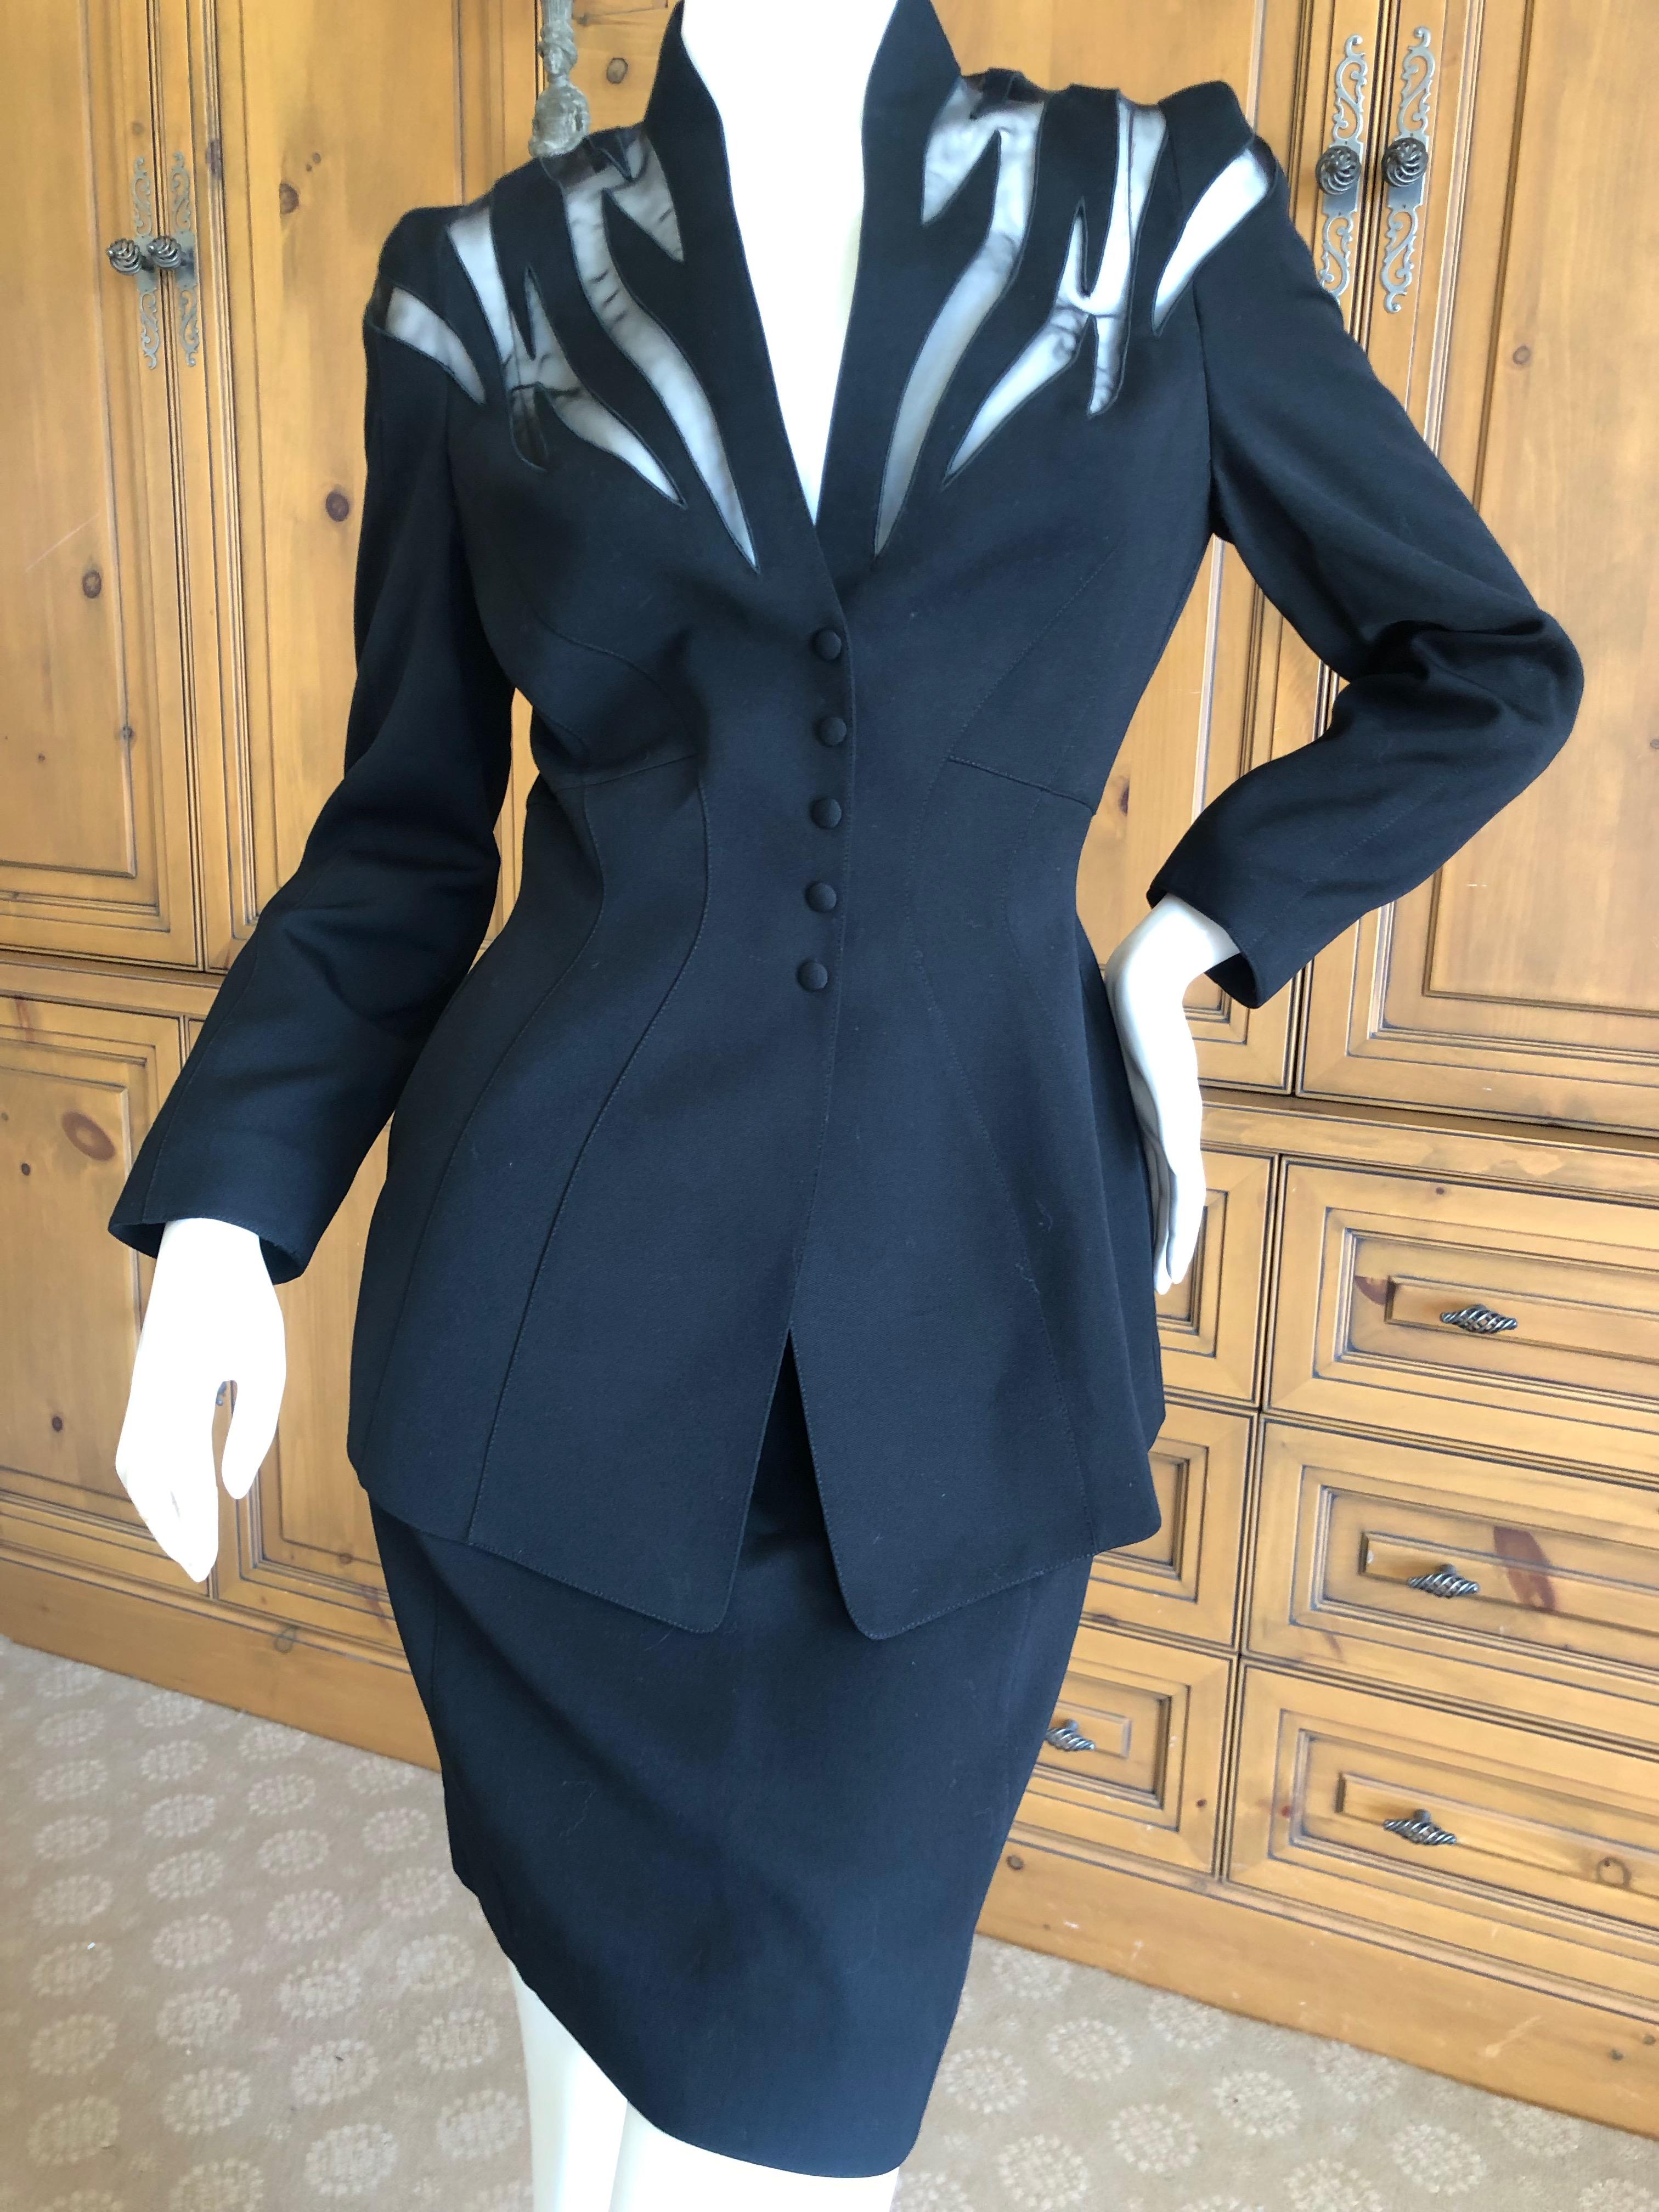 Thierry Mugler Vintage 1980's Black Peplum Suit with Sheer Flame Pattern Details In Excellent Condition For Sale In Cloverdale, CA